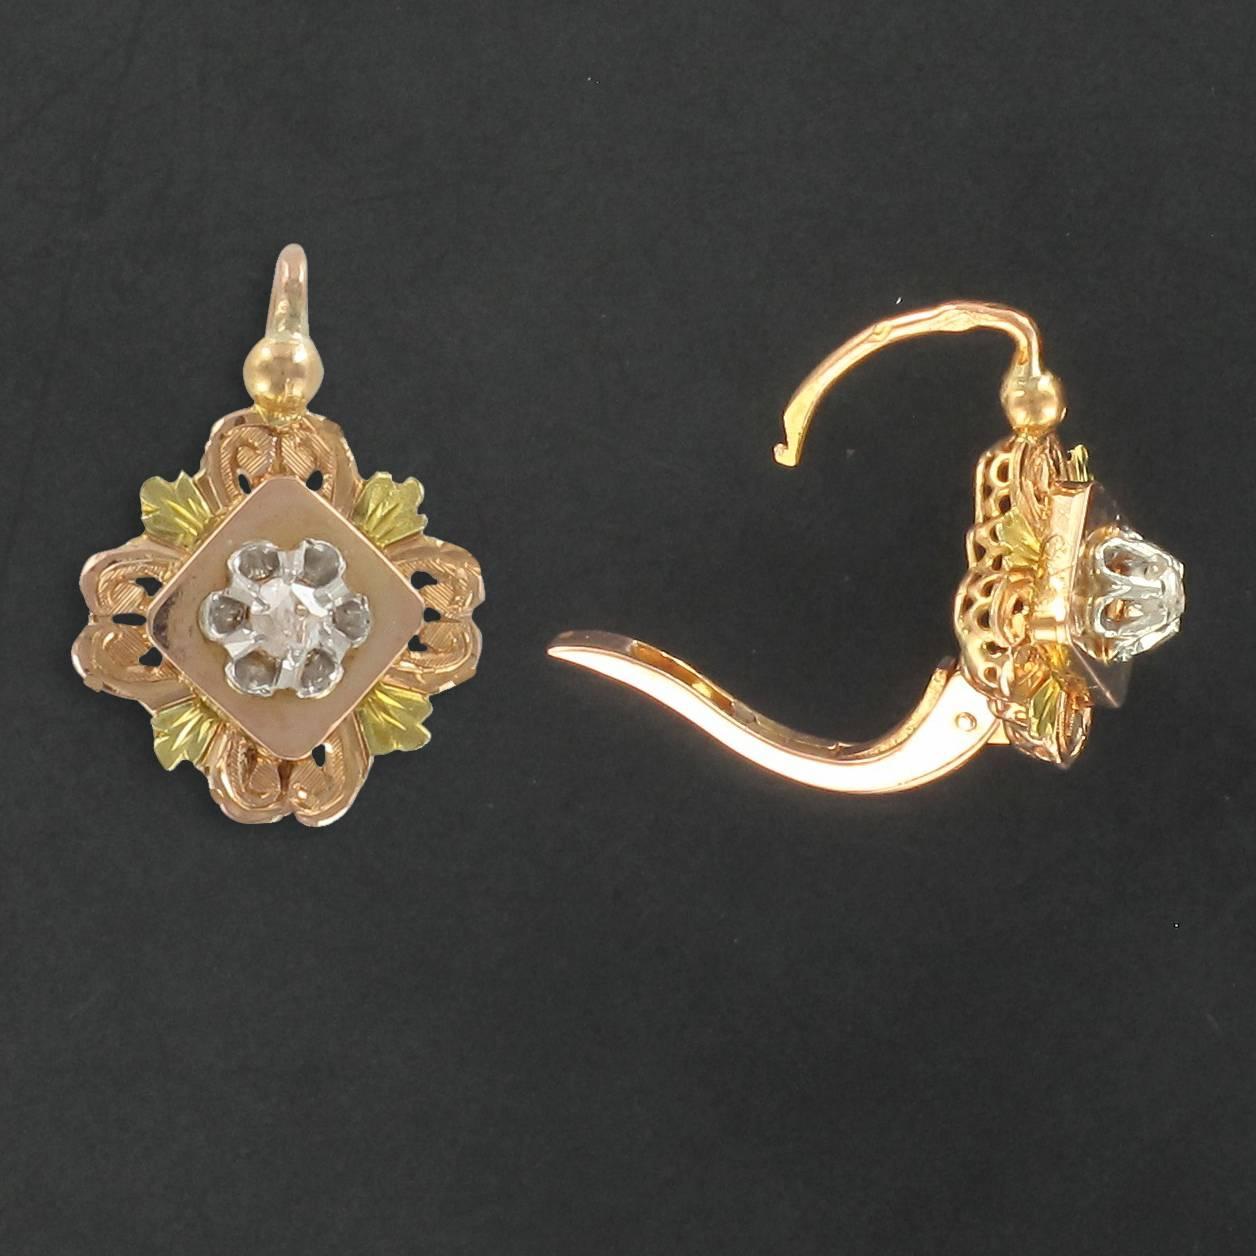 Earrings in 18 carat rose gold, eagle head hallmark. 

Each of these antique earrings features a diamond shaped plaque decoratively edged with a delicately engraved rose gold and green gold design. At the centre of each plaque is a claw set